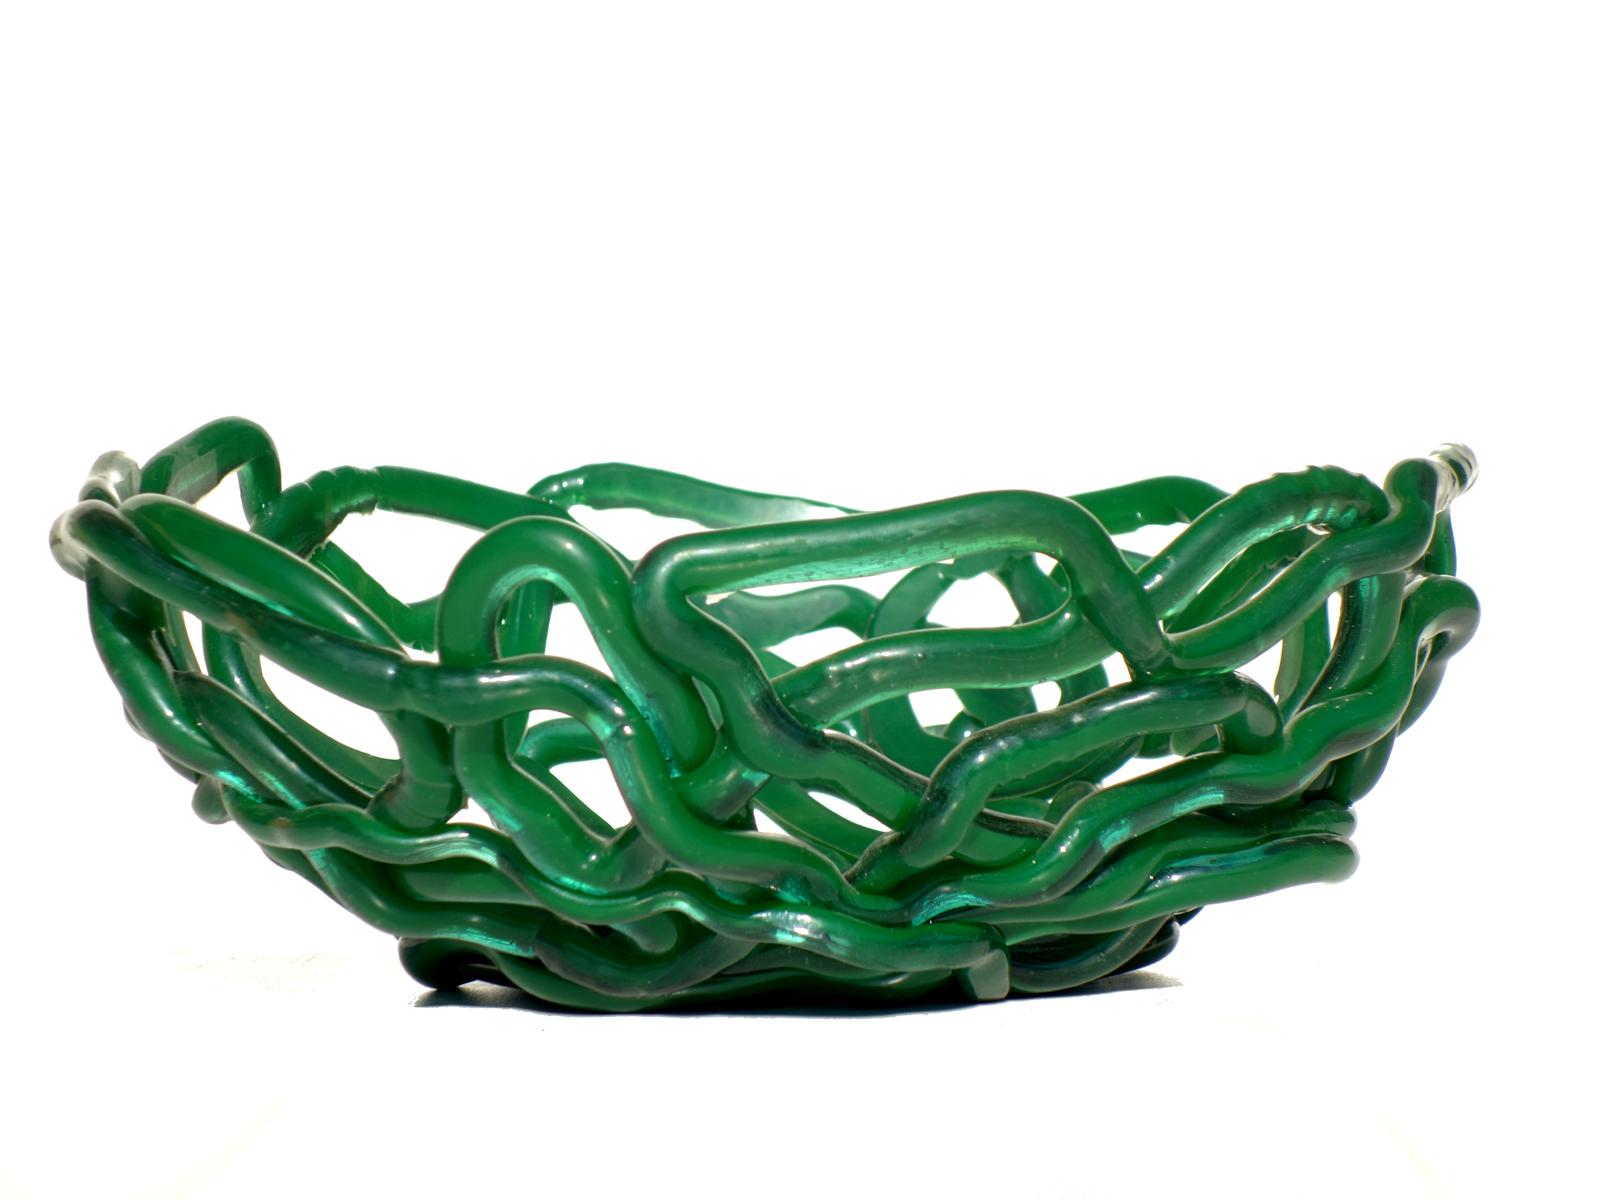 Tutti Frutti basket
Green soft resin
designed by Gaetano Pesce in 1995 for Fish Design collection.

With original box
Excellent condiction.